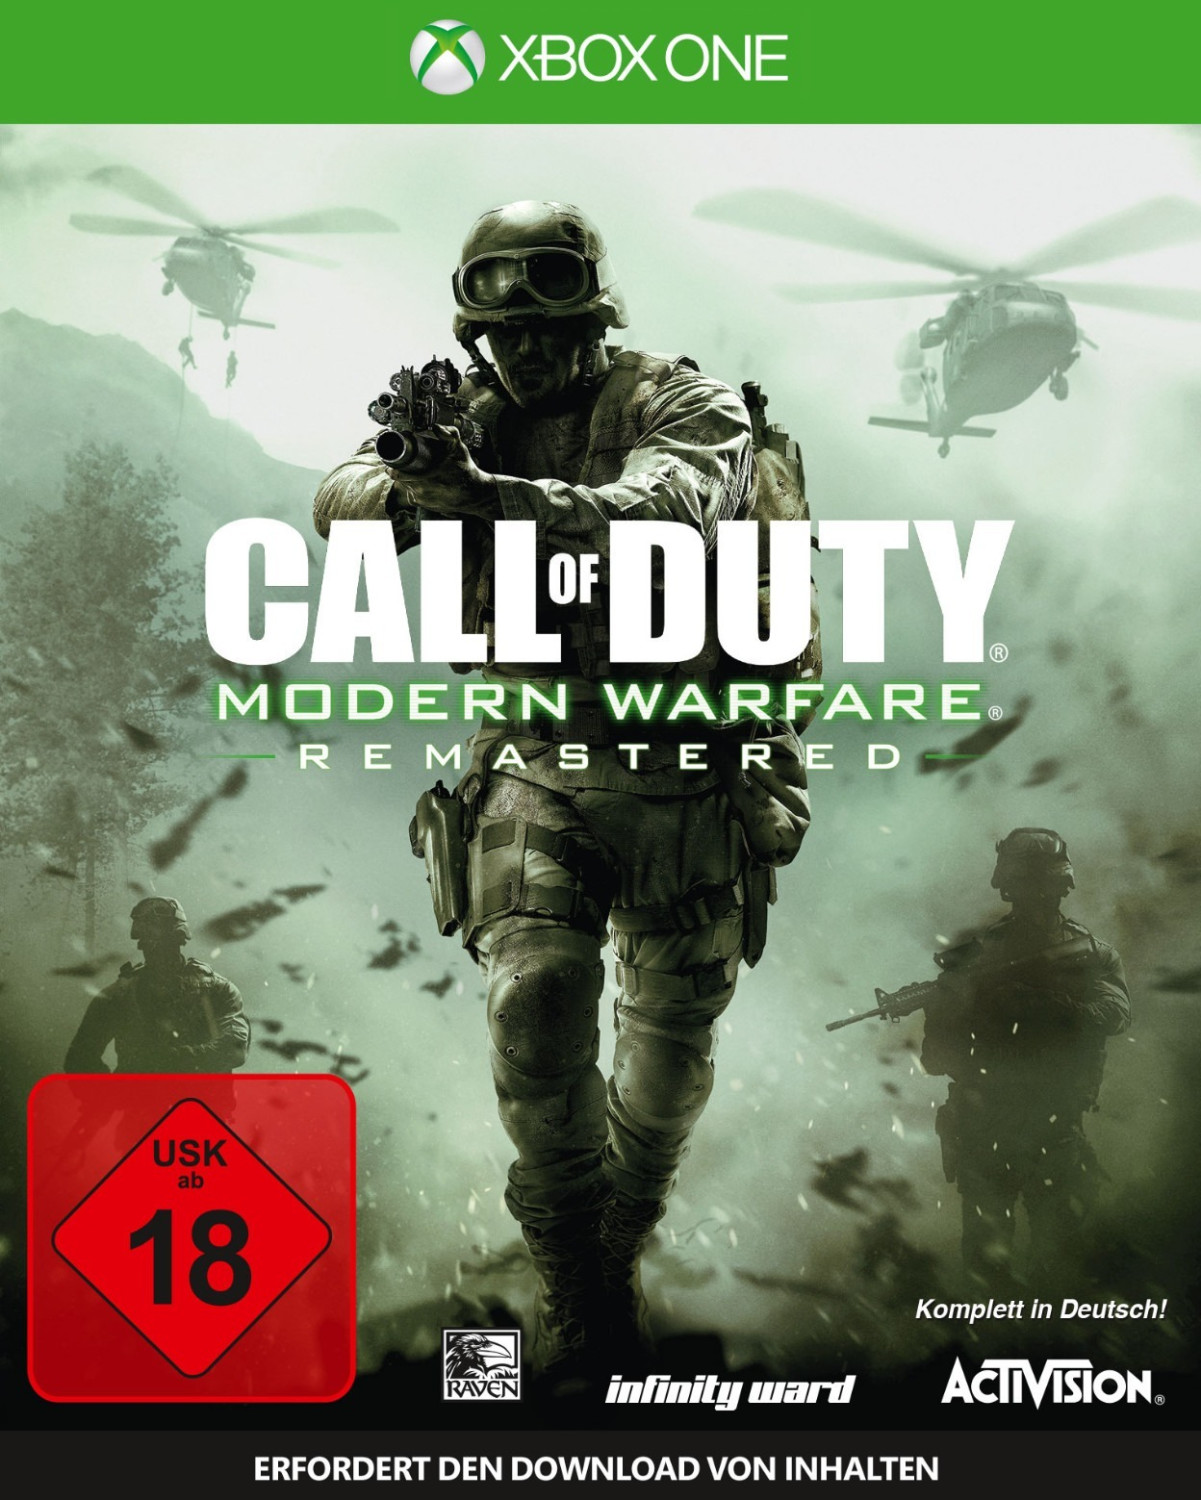 Photos - Game Blizzard Activision  Call of Duty: Modern Warfare - Remastered  (Xbox One)